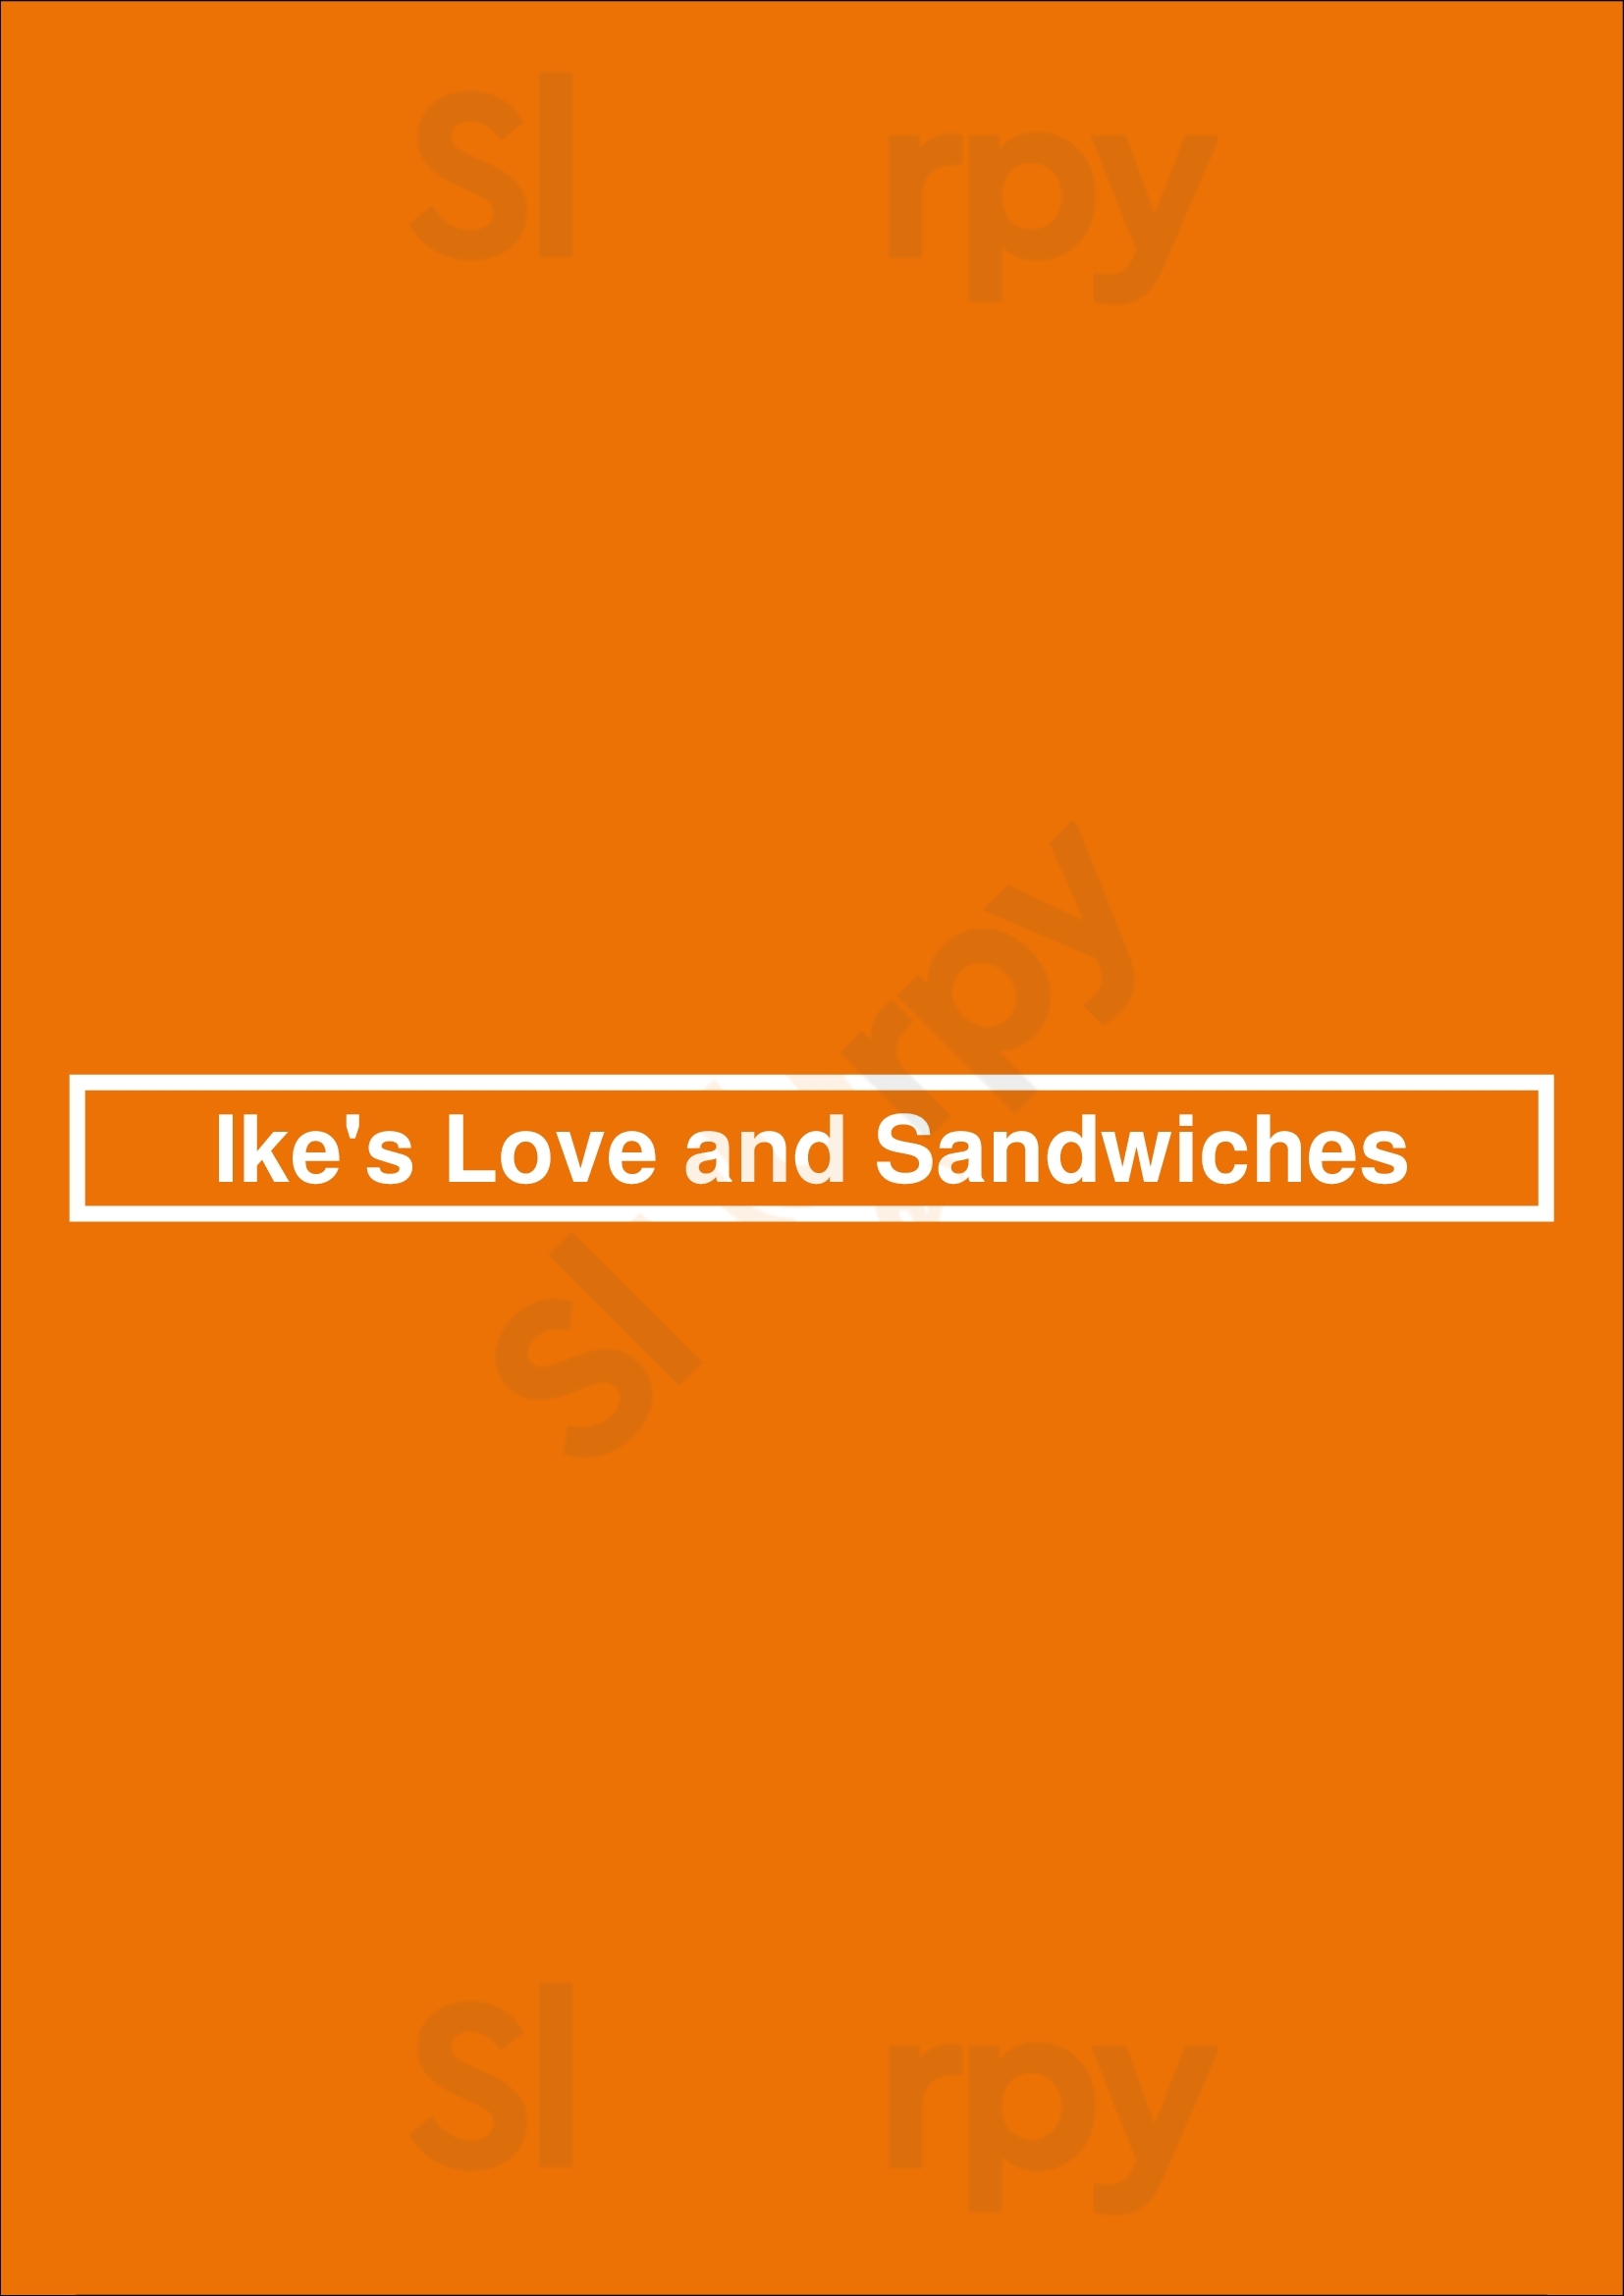 Ike's Love And Sandwiches Oakland Menu - 1